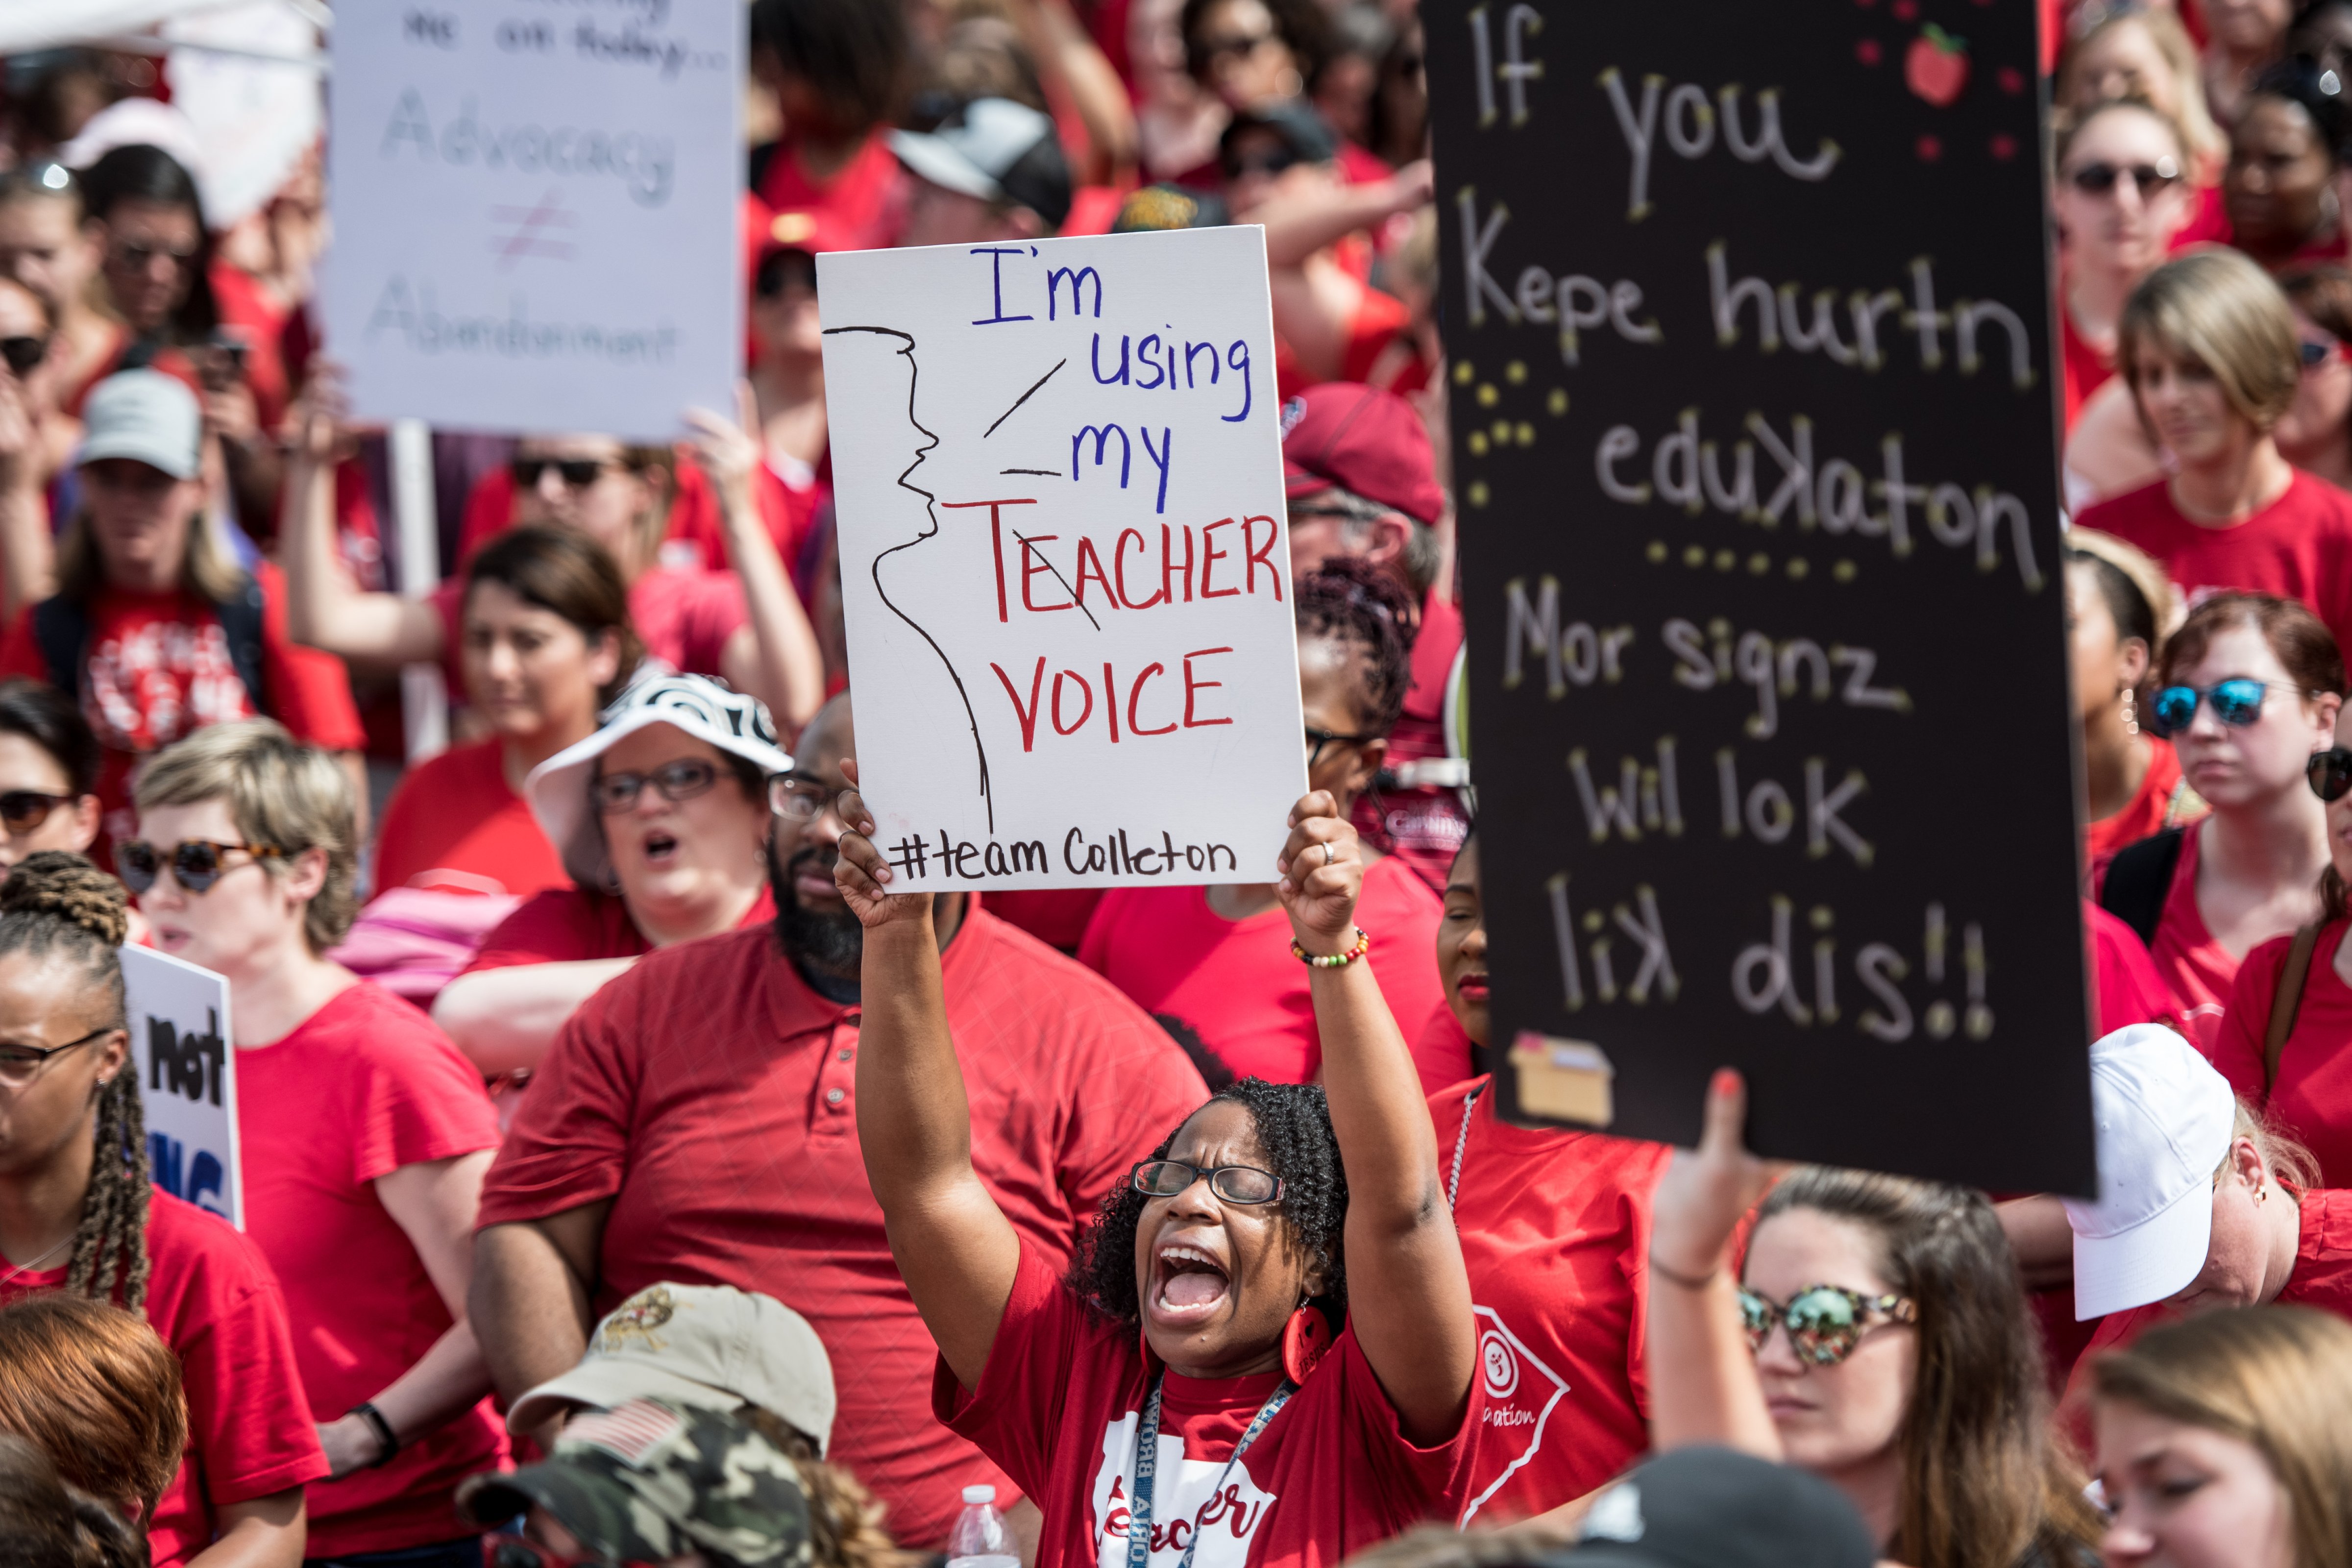 Colleton County Middle School math teacher Gloria Brown shouts at a rally with other educators and their supporters at the South Carolina State House on May 1, 2019 in Columbia, South Carolina. (Sean Rayford/Getty Images)